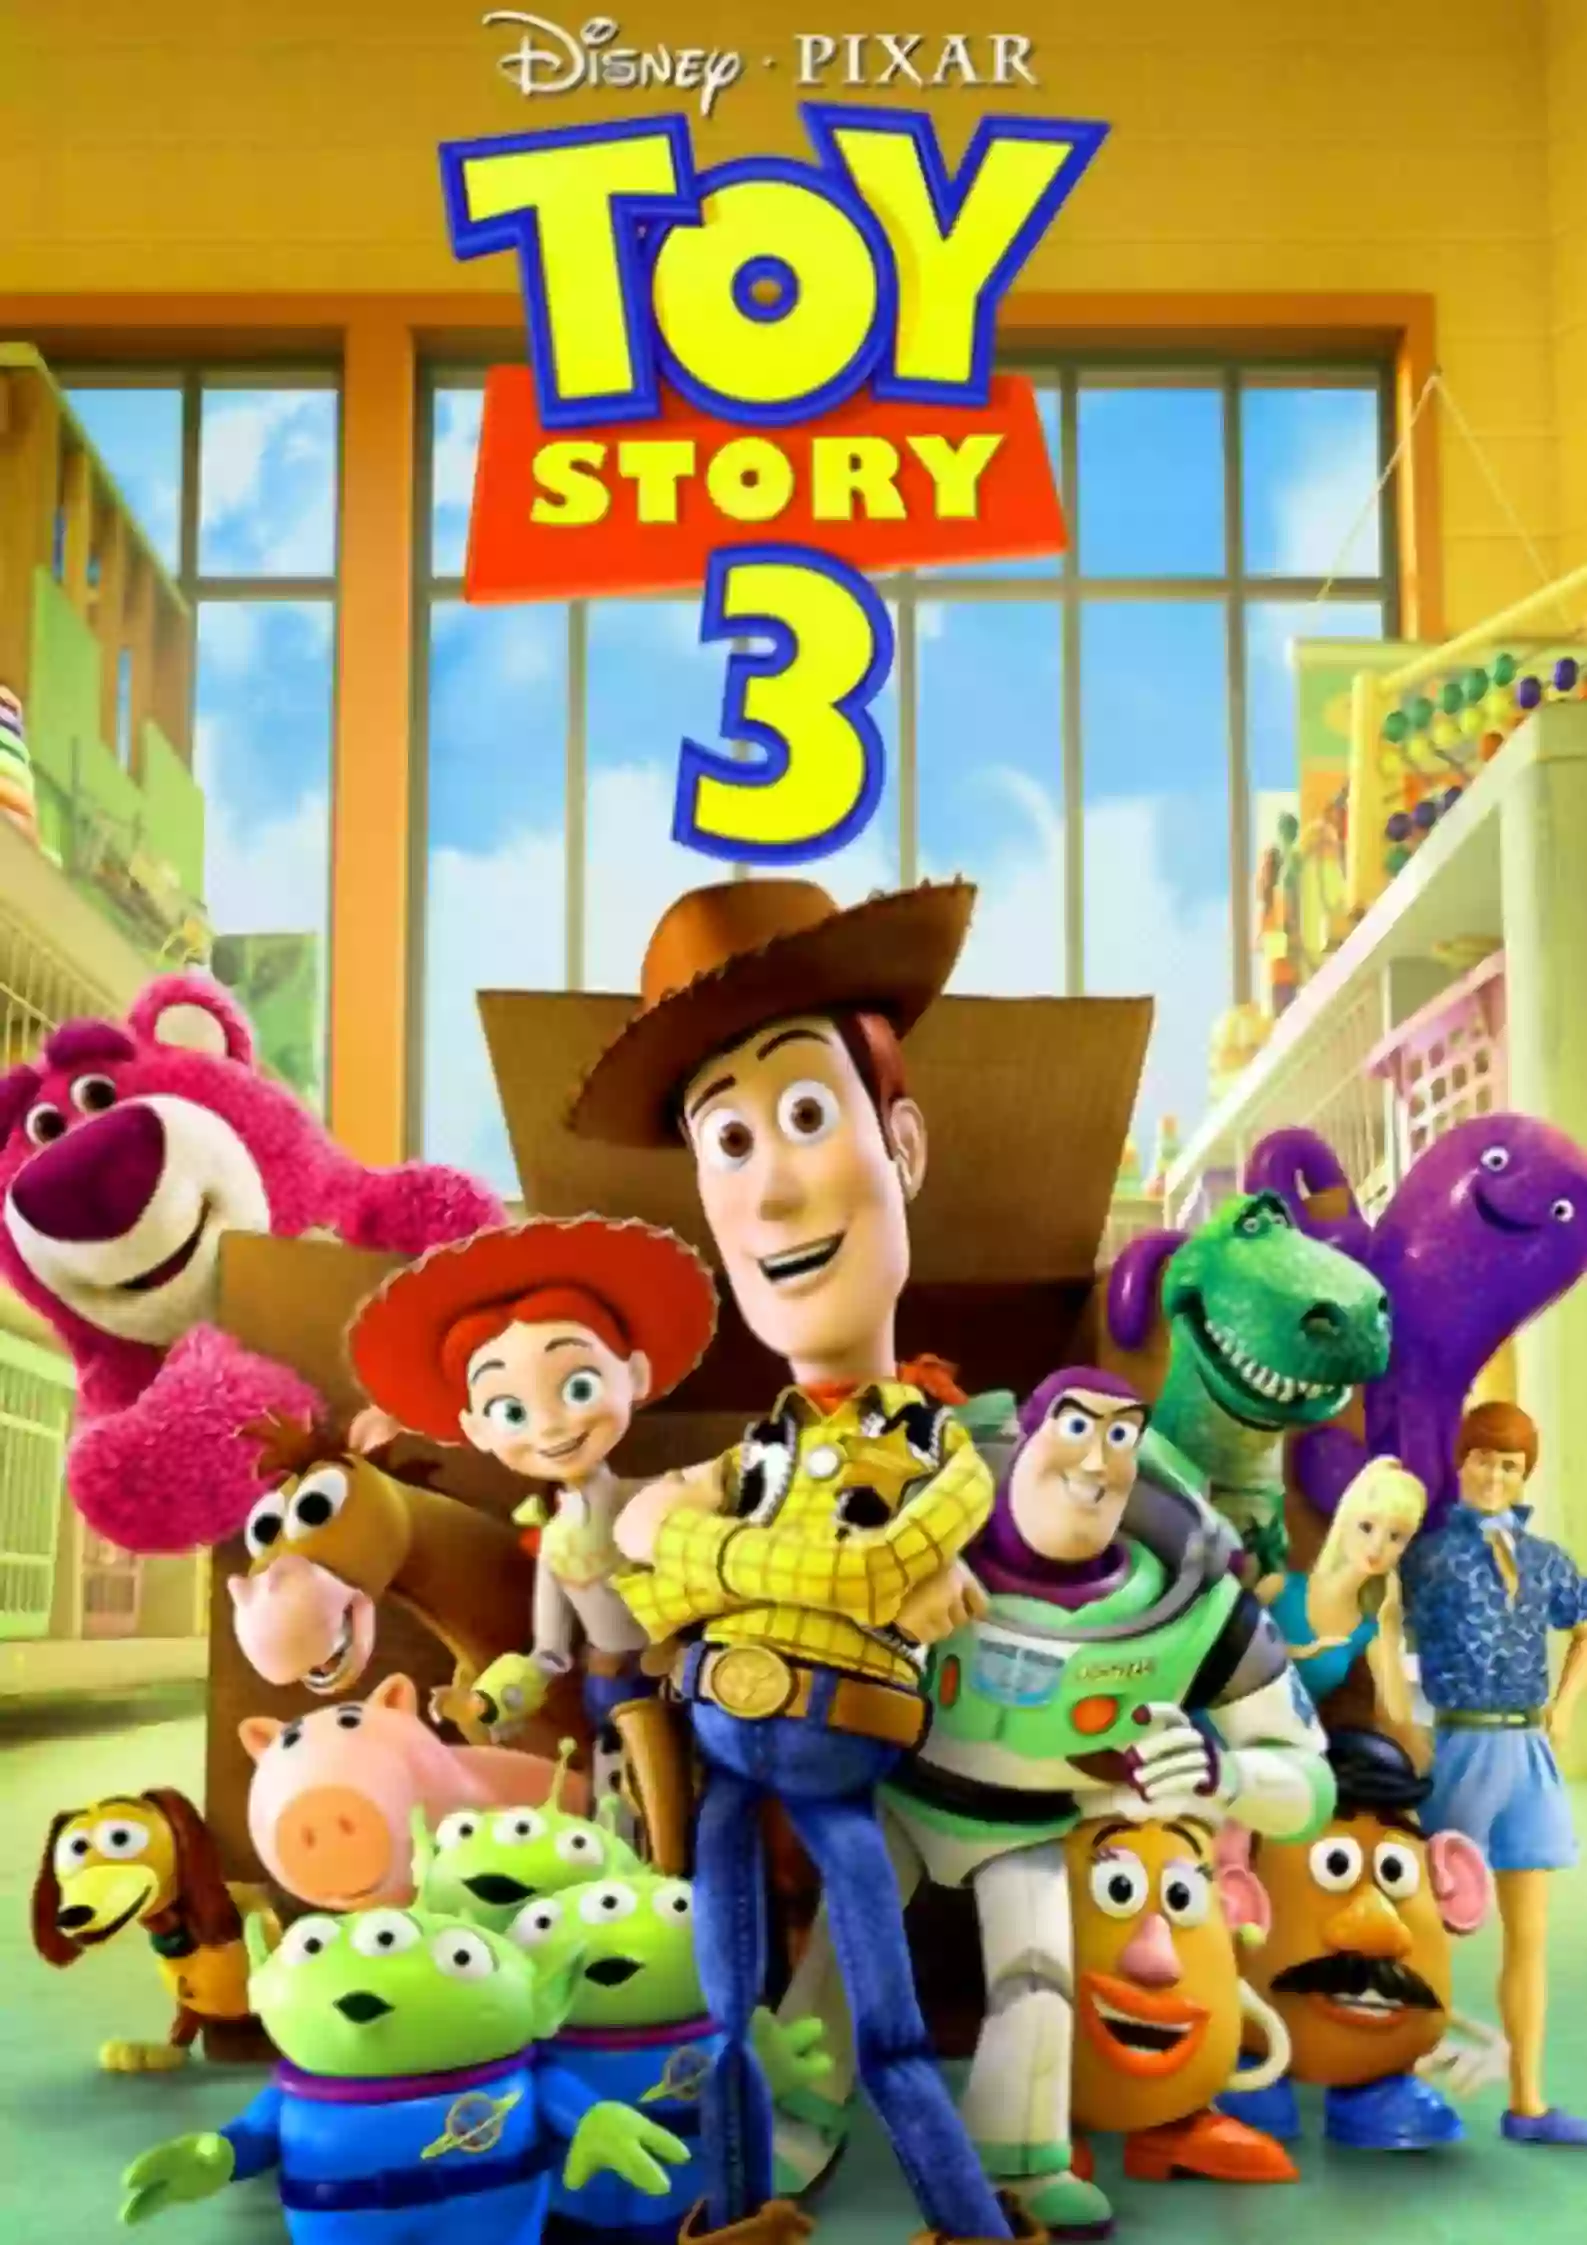 Toy Story 3 Parents Guide | Toy Story 3 Age Rating | 2010